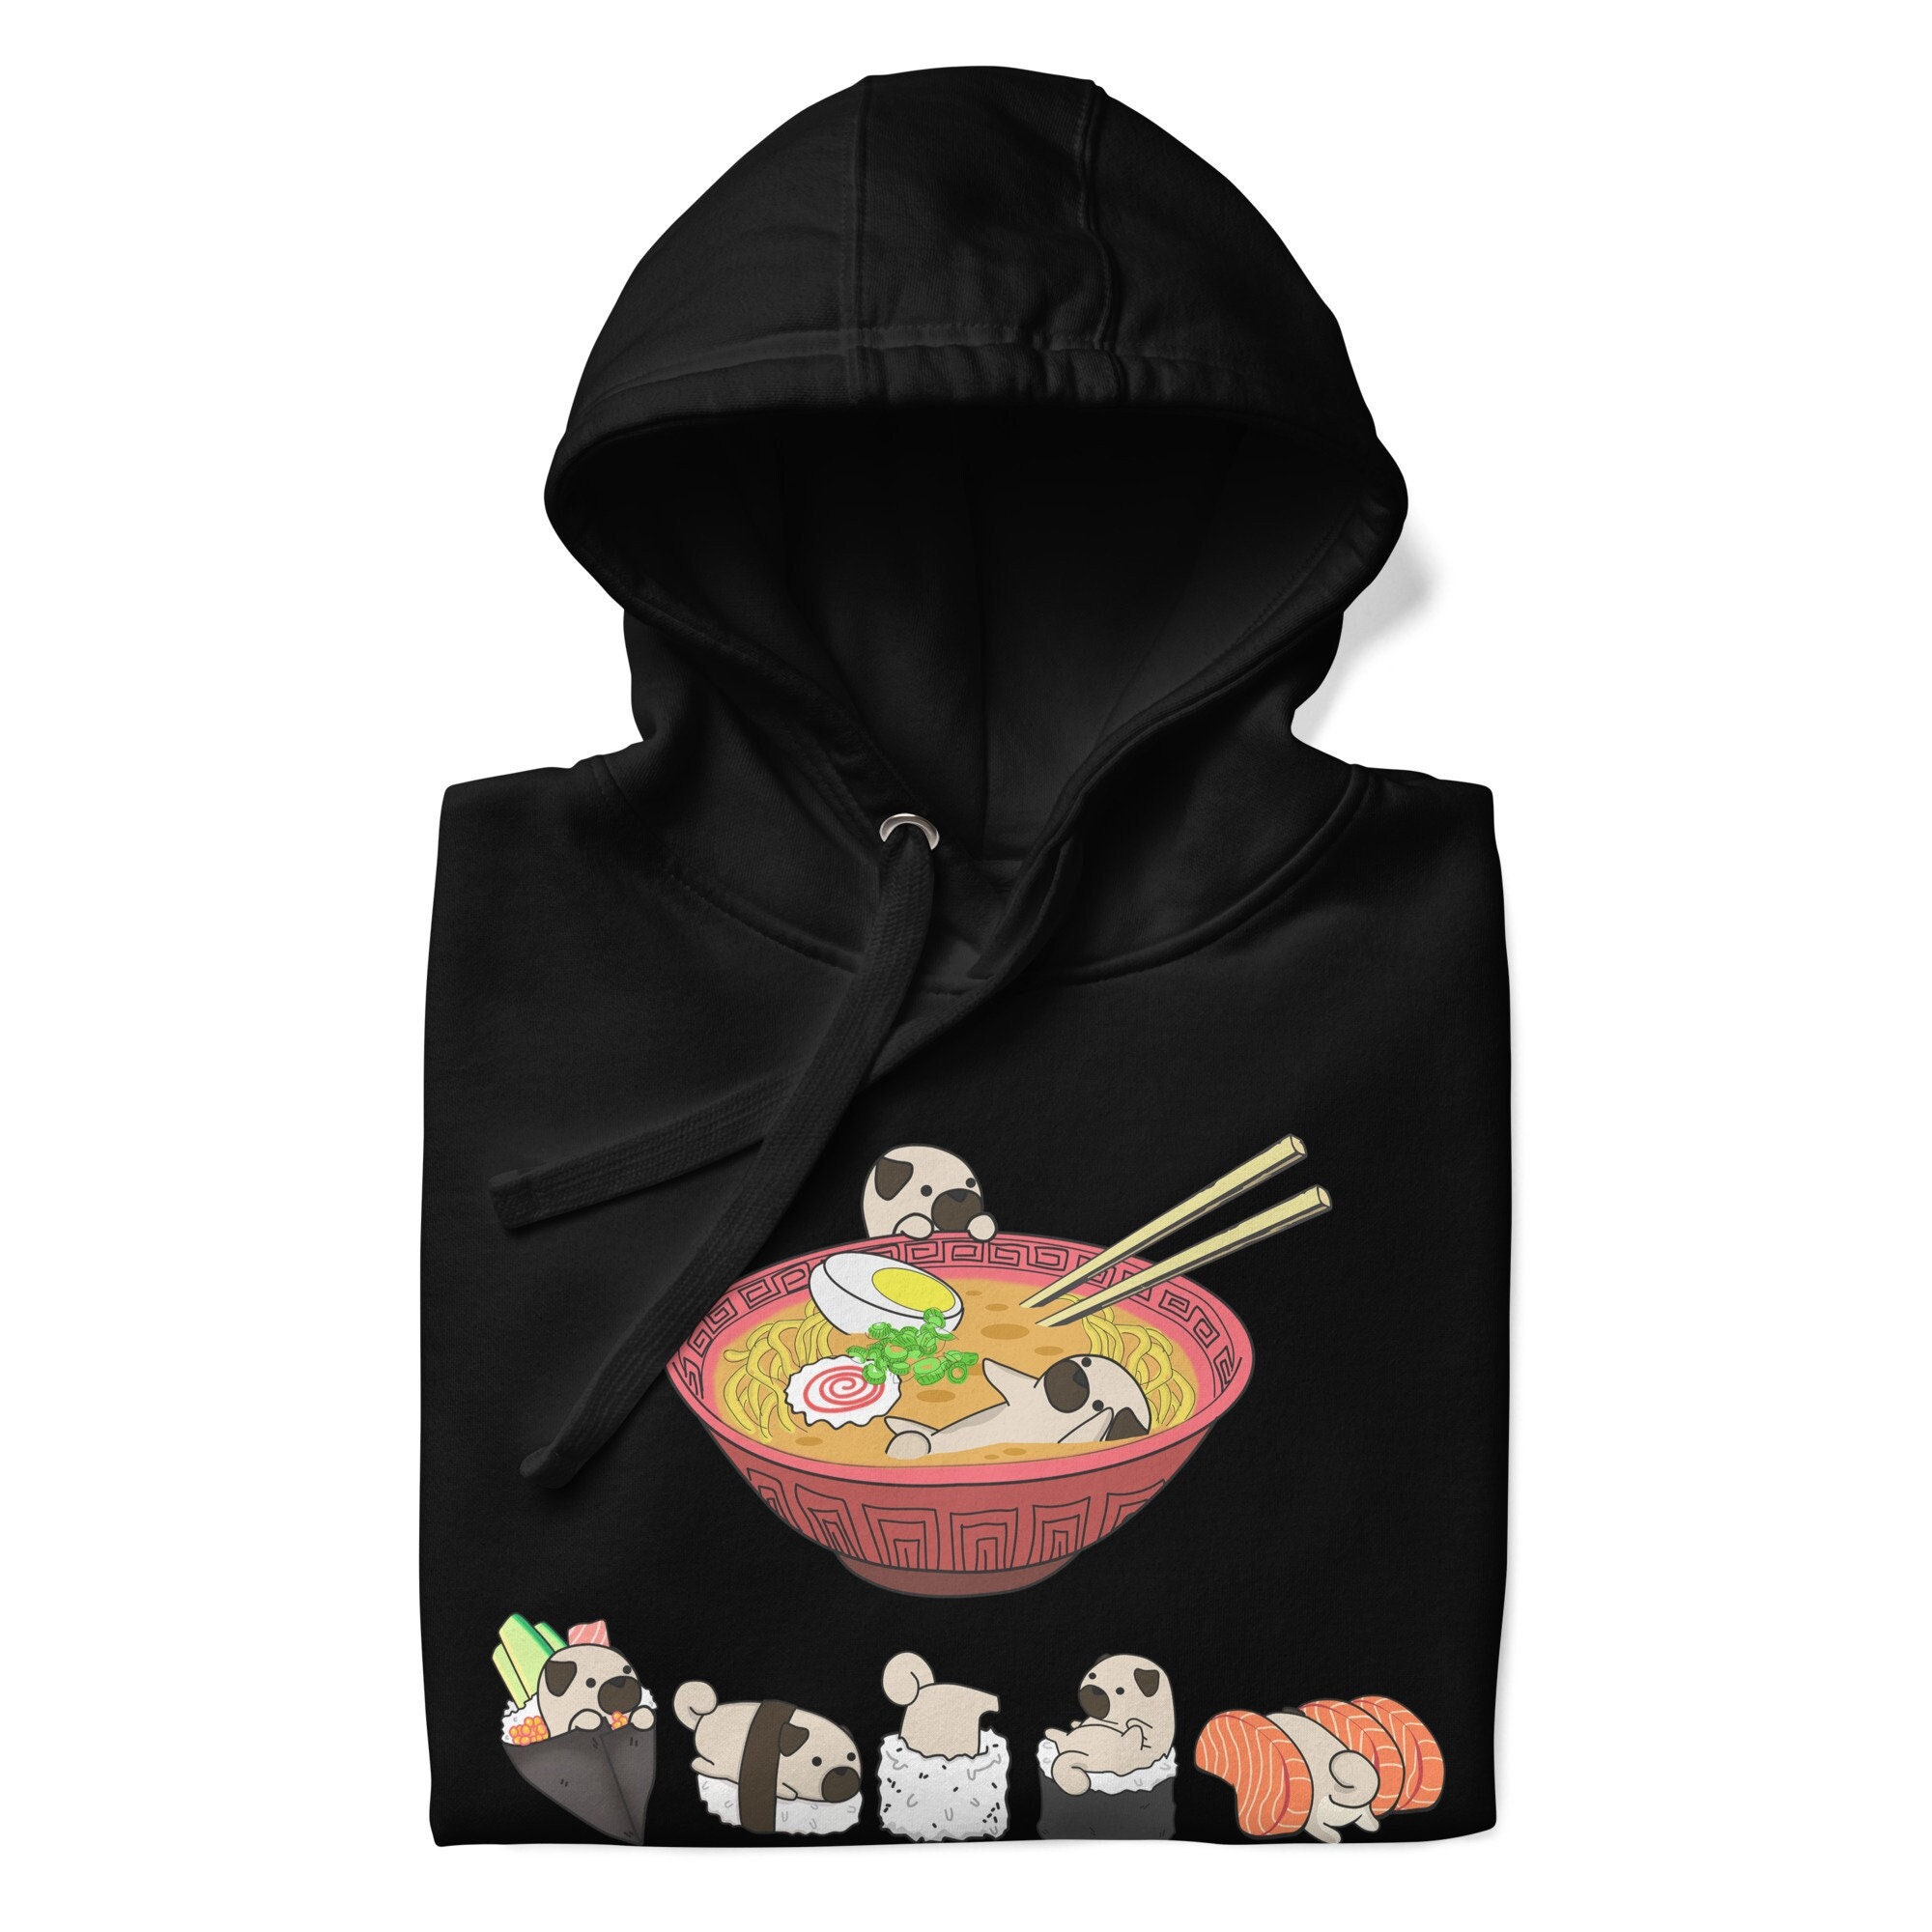 Kawaii Sushi Cannon Ball Japanese Soy Sauce Anime Foodie Pullover Hoodie